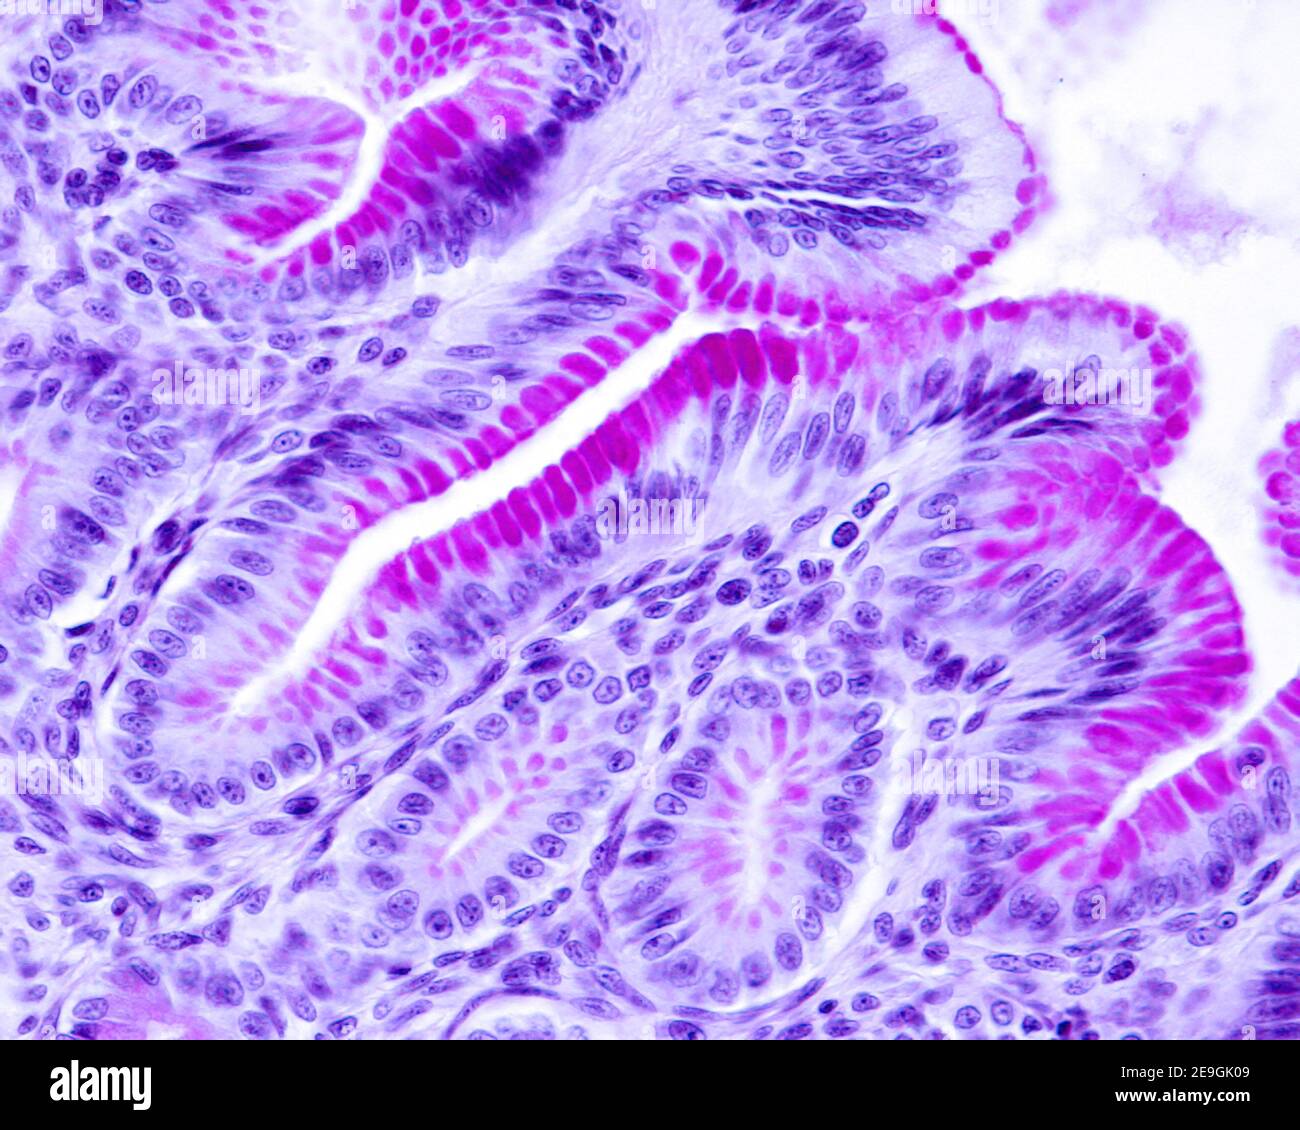 Gastric mucosa where the intense PAS positivity of the epithelium lining the inner surface of the stomach and the gastric pits is observed. Stock Photo